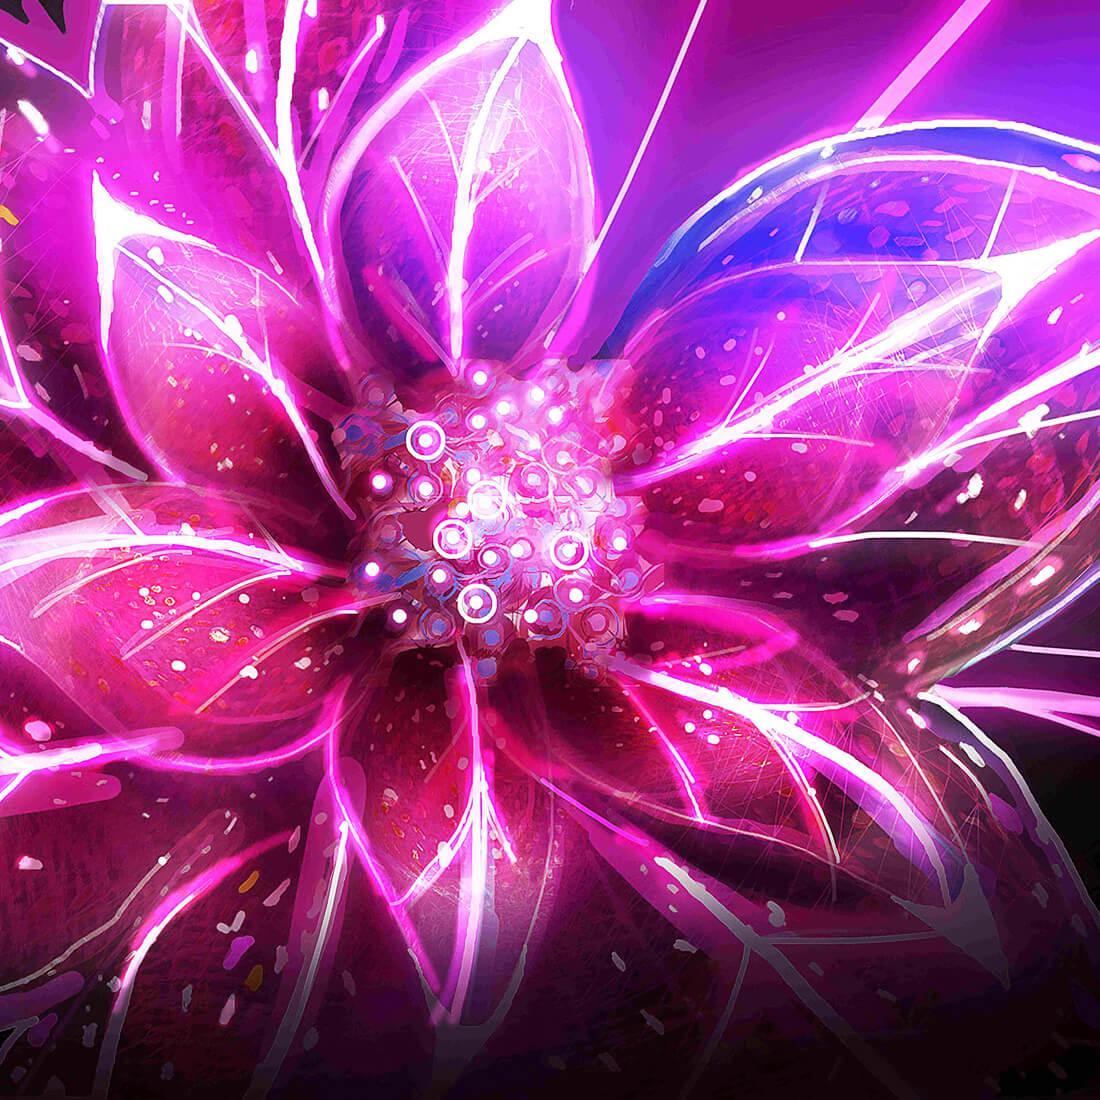 Neon Flowers Live Wallpaper for Android